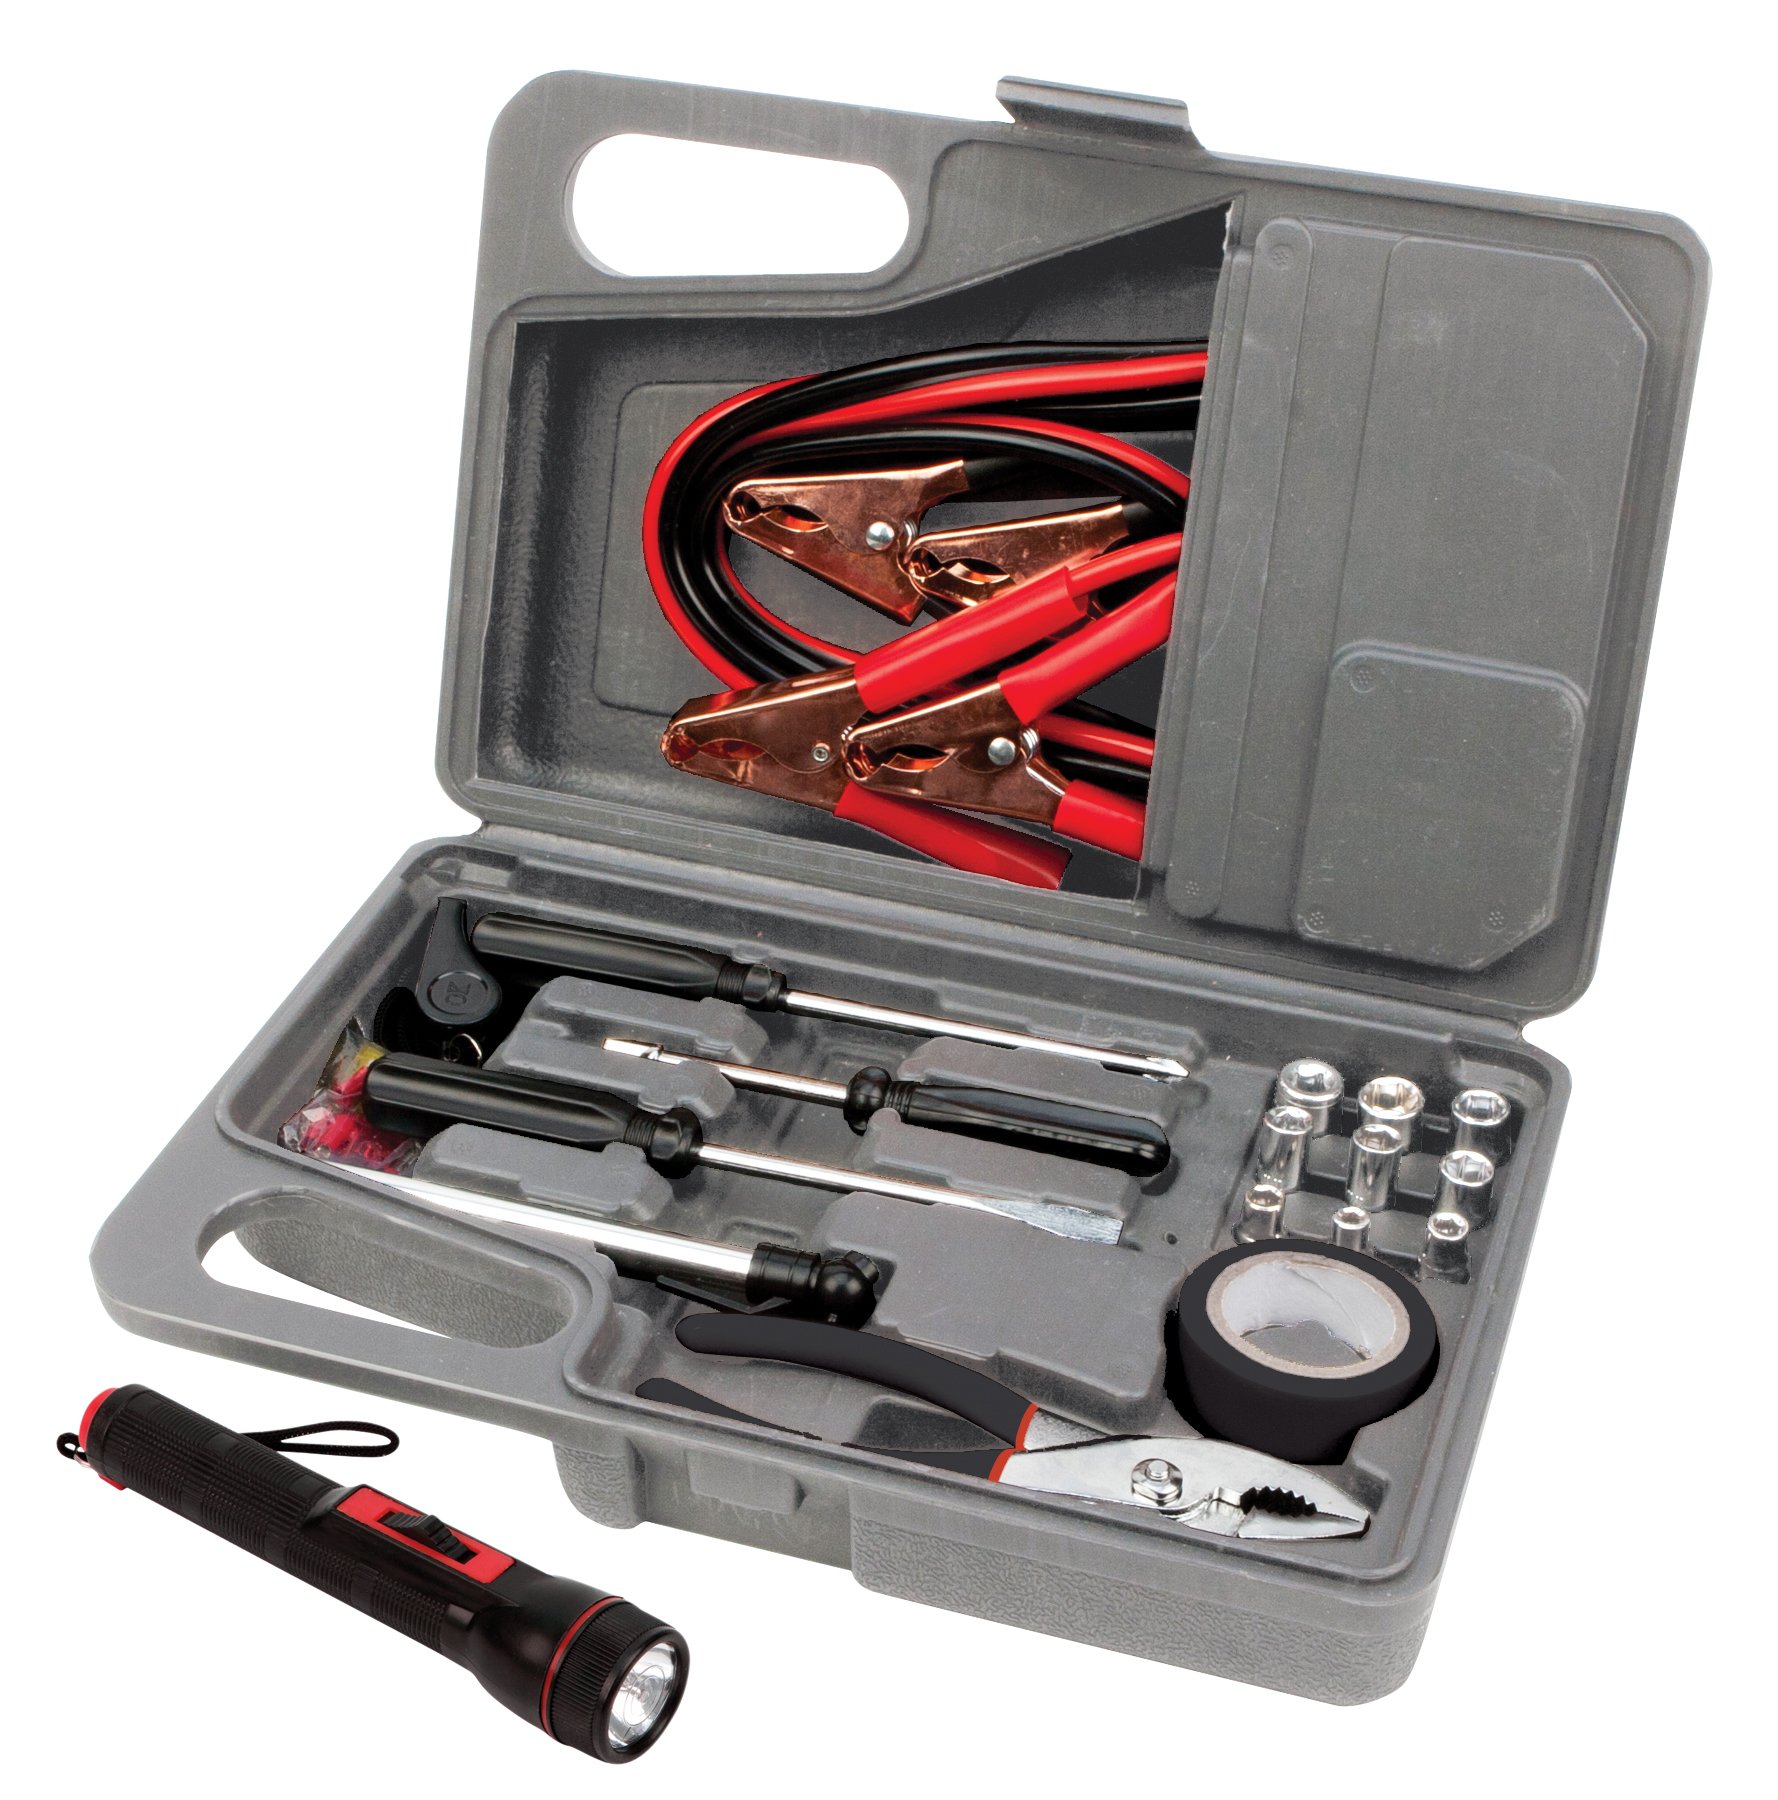 Performance Tool Commuter Emergency Roadside Safety Tool Kit $15.10 + Free Shipping w/ Prime or $25+